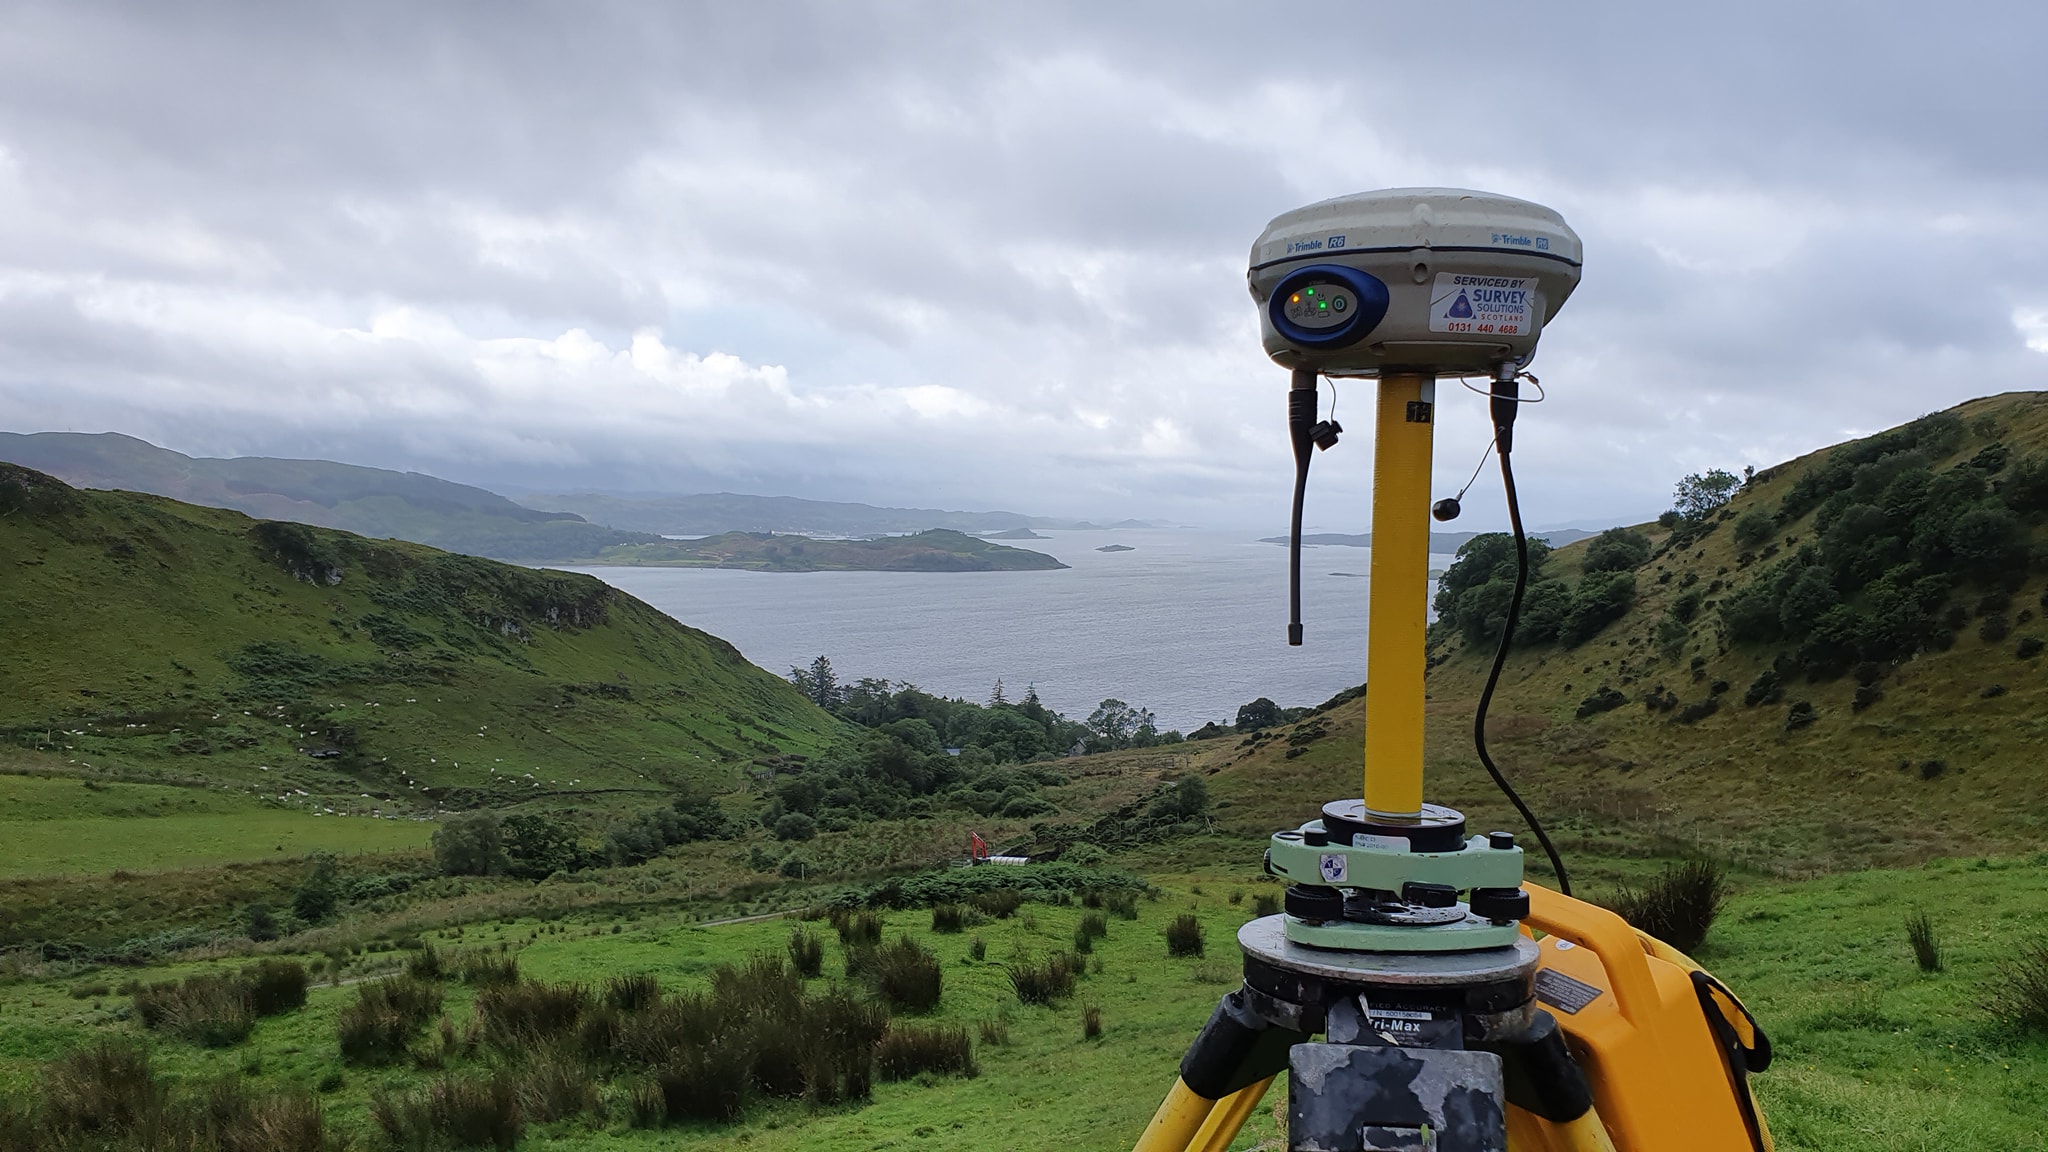 Surveying work on the Rural West Coast